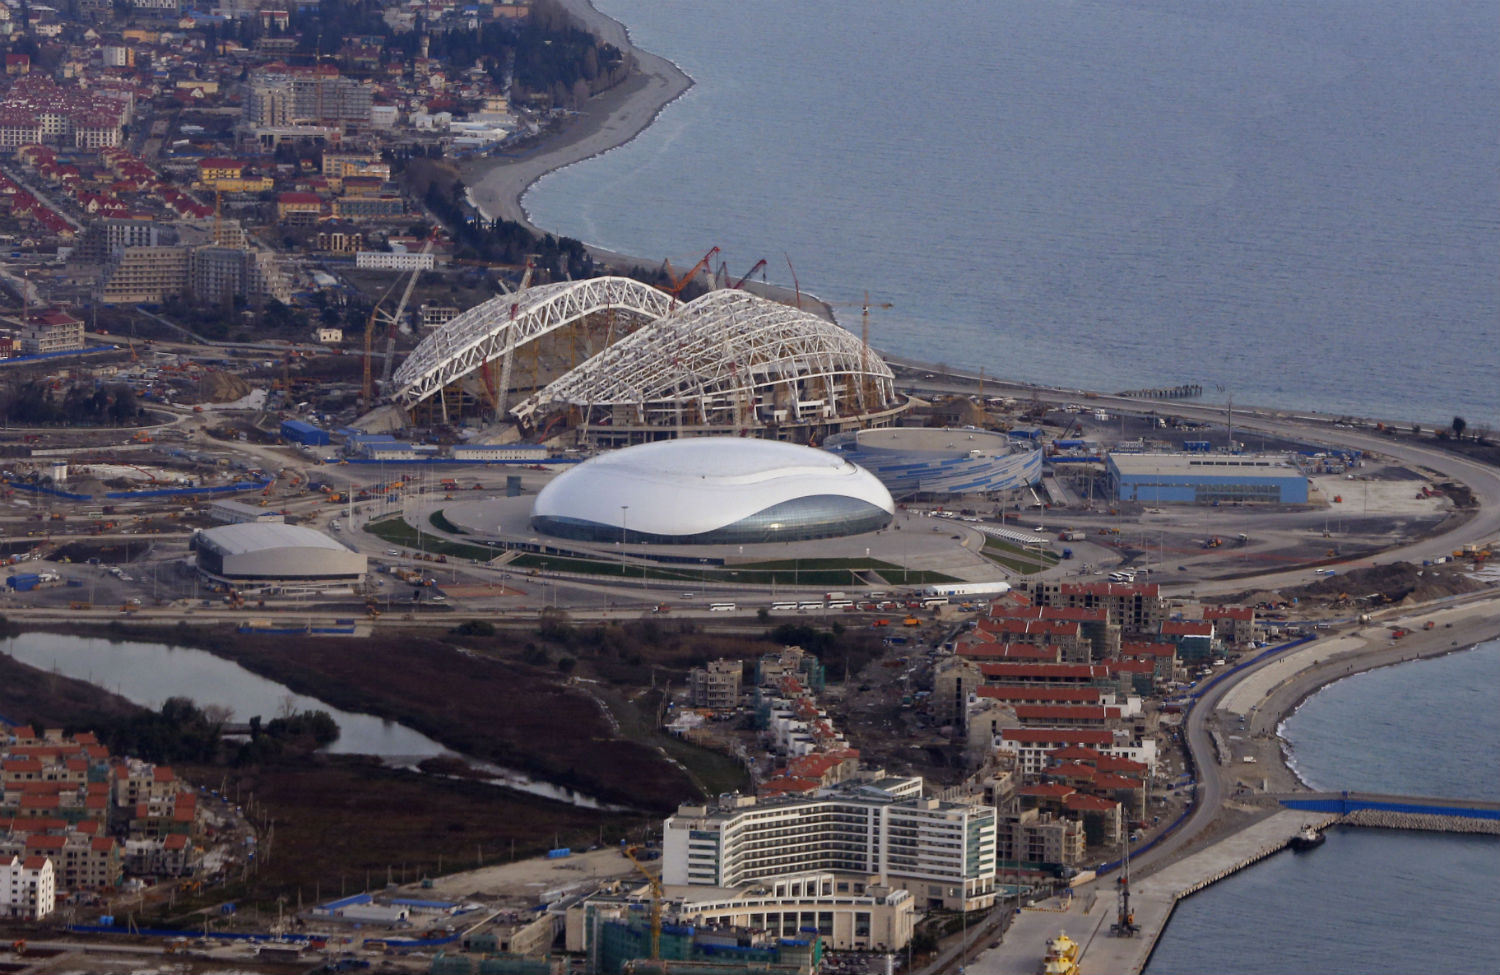 What Did Sochi Get for $51 Billion? Highways, Railroads and a Lot of White Elephants